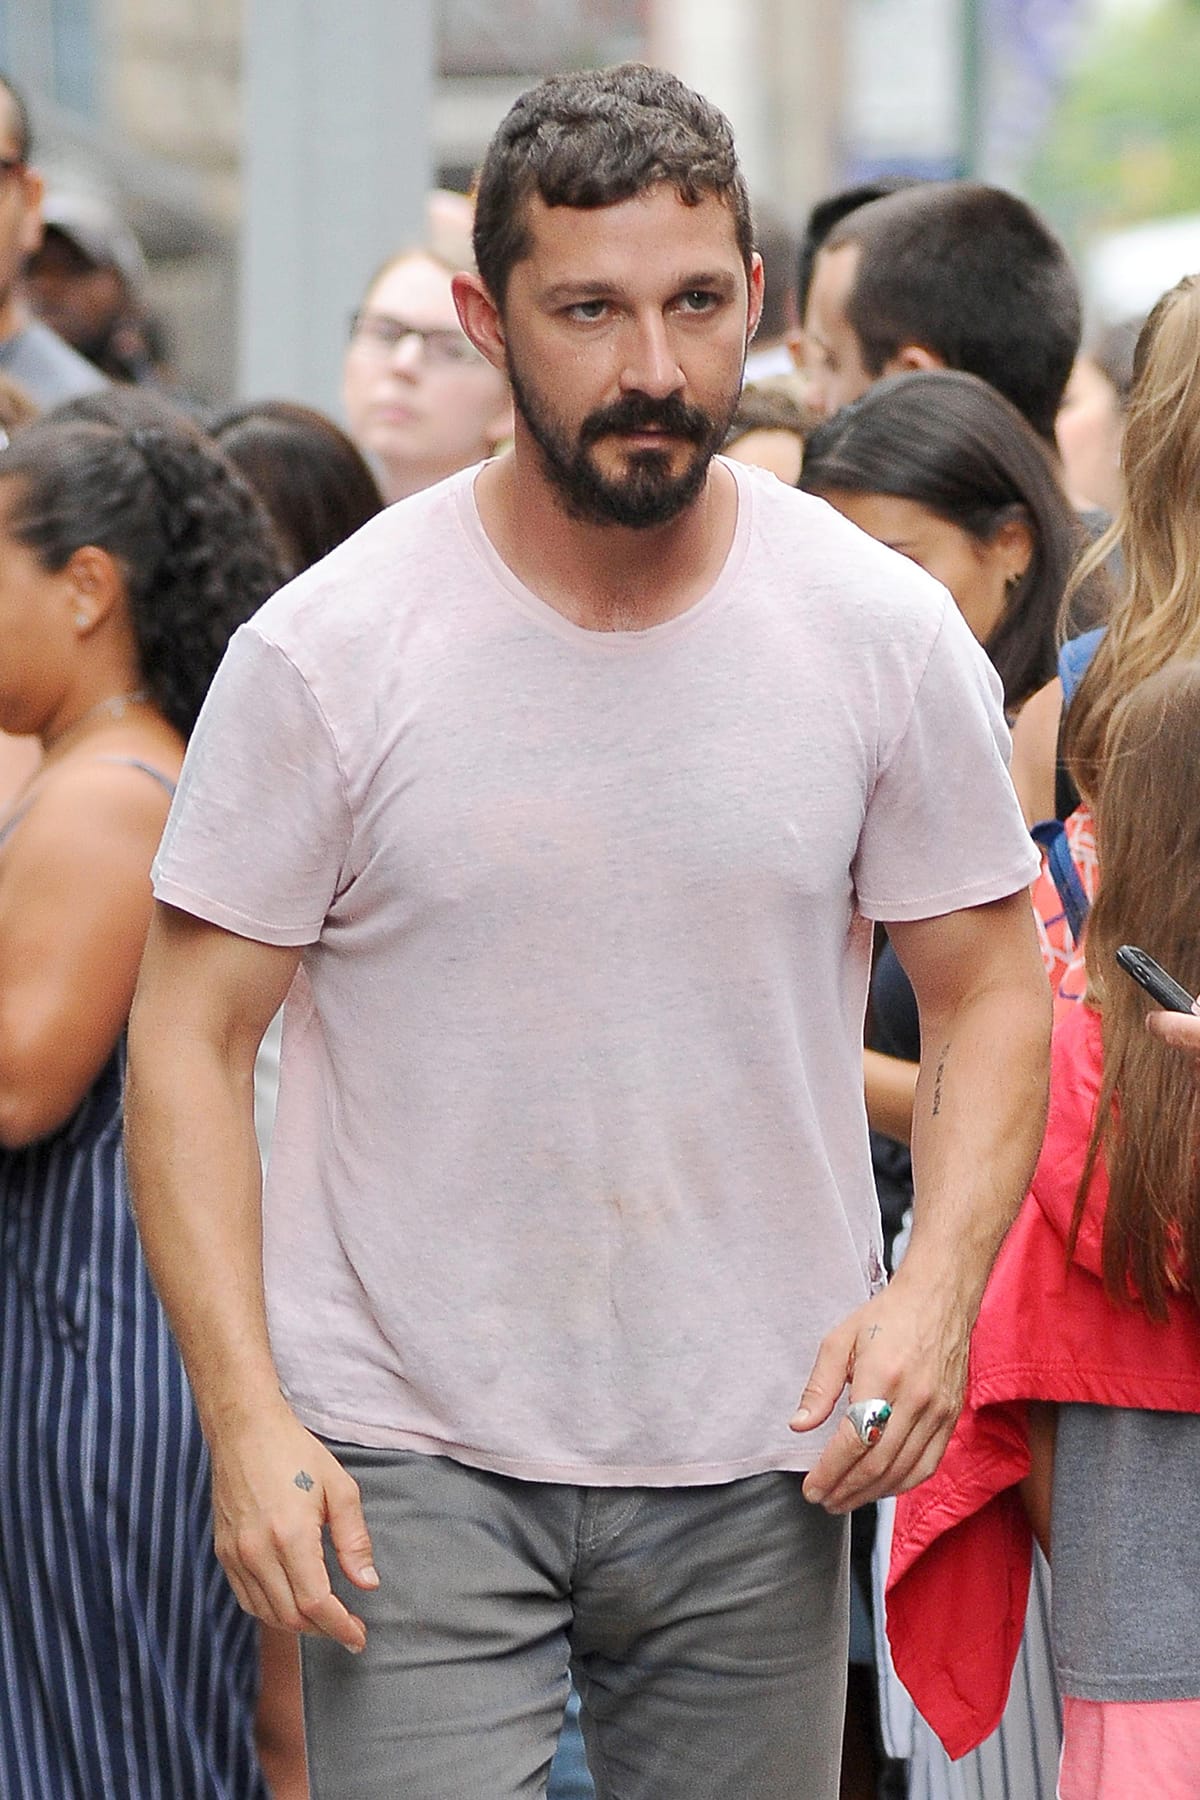 Shia LaBeouf denies getting fired from Don't Worry Darling